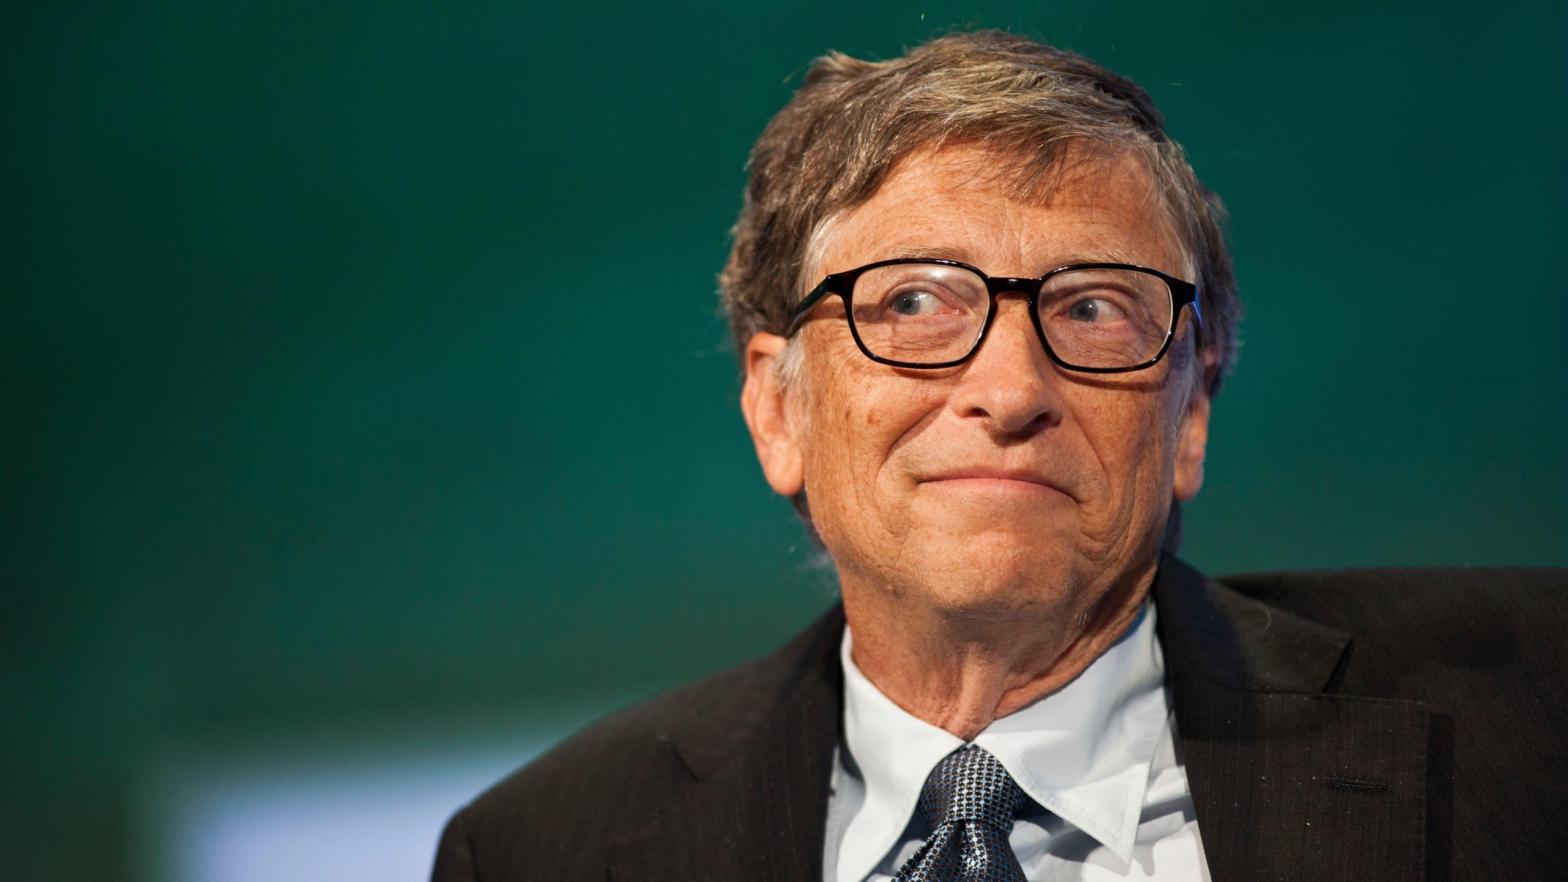 File photo of Bill Gates at the Clinton Global Initiative meeting on September 24, 2013 in New York City. (Photo: Ramin Talaie, Getty Images)